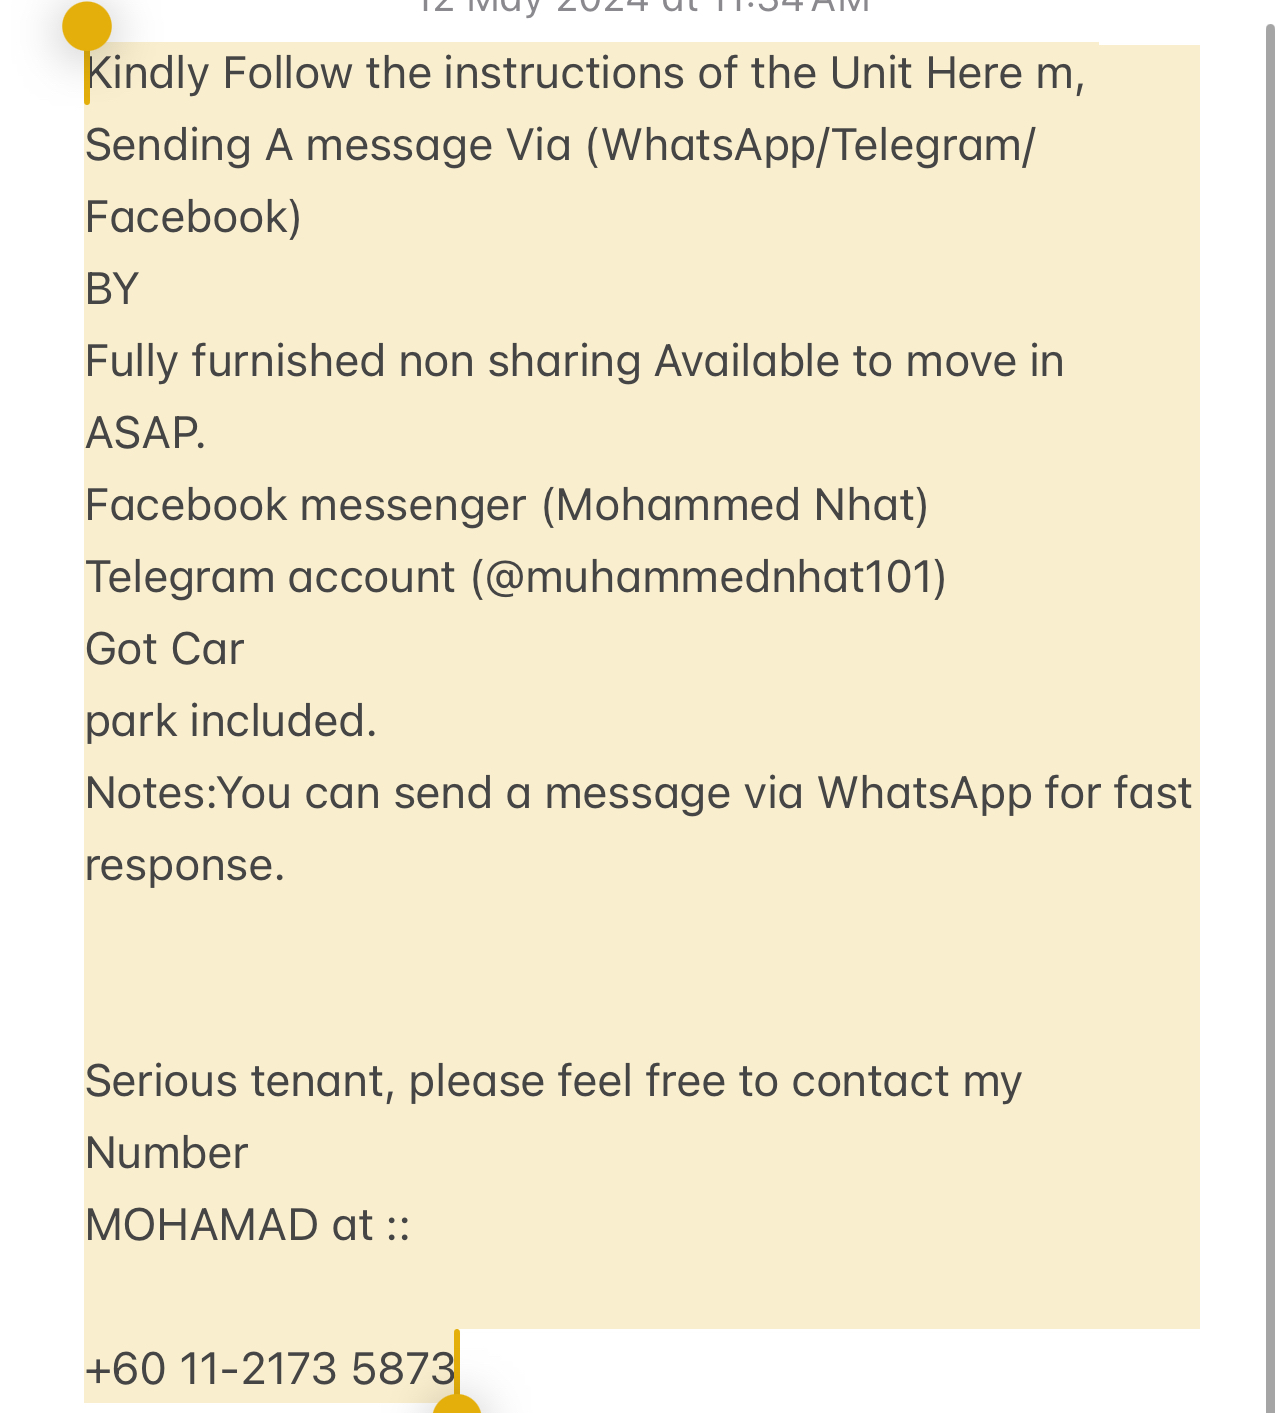 room for rent, studio, jalan hang tuah, Send the owner a message on WhatsApp/facebook if you want to RENT the unit facebook (Mohammed Nhat)&Telegram(@muhammednhat101) Fully furnished non sharing :(comfortable)